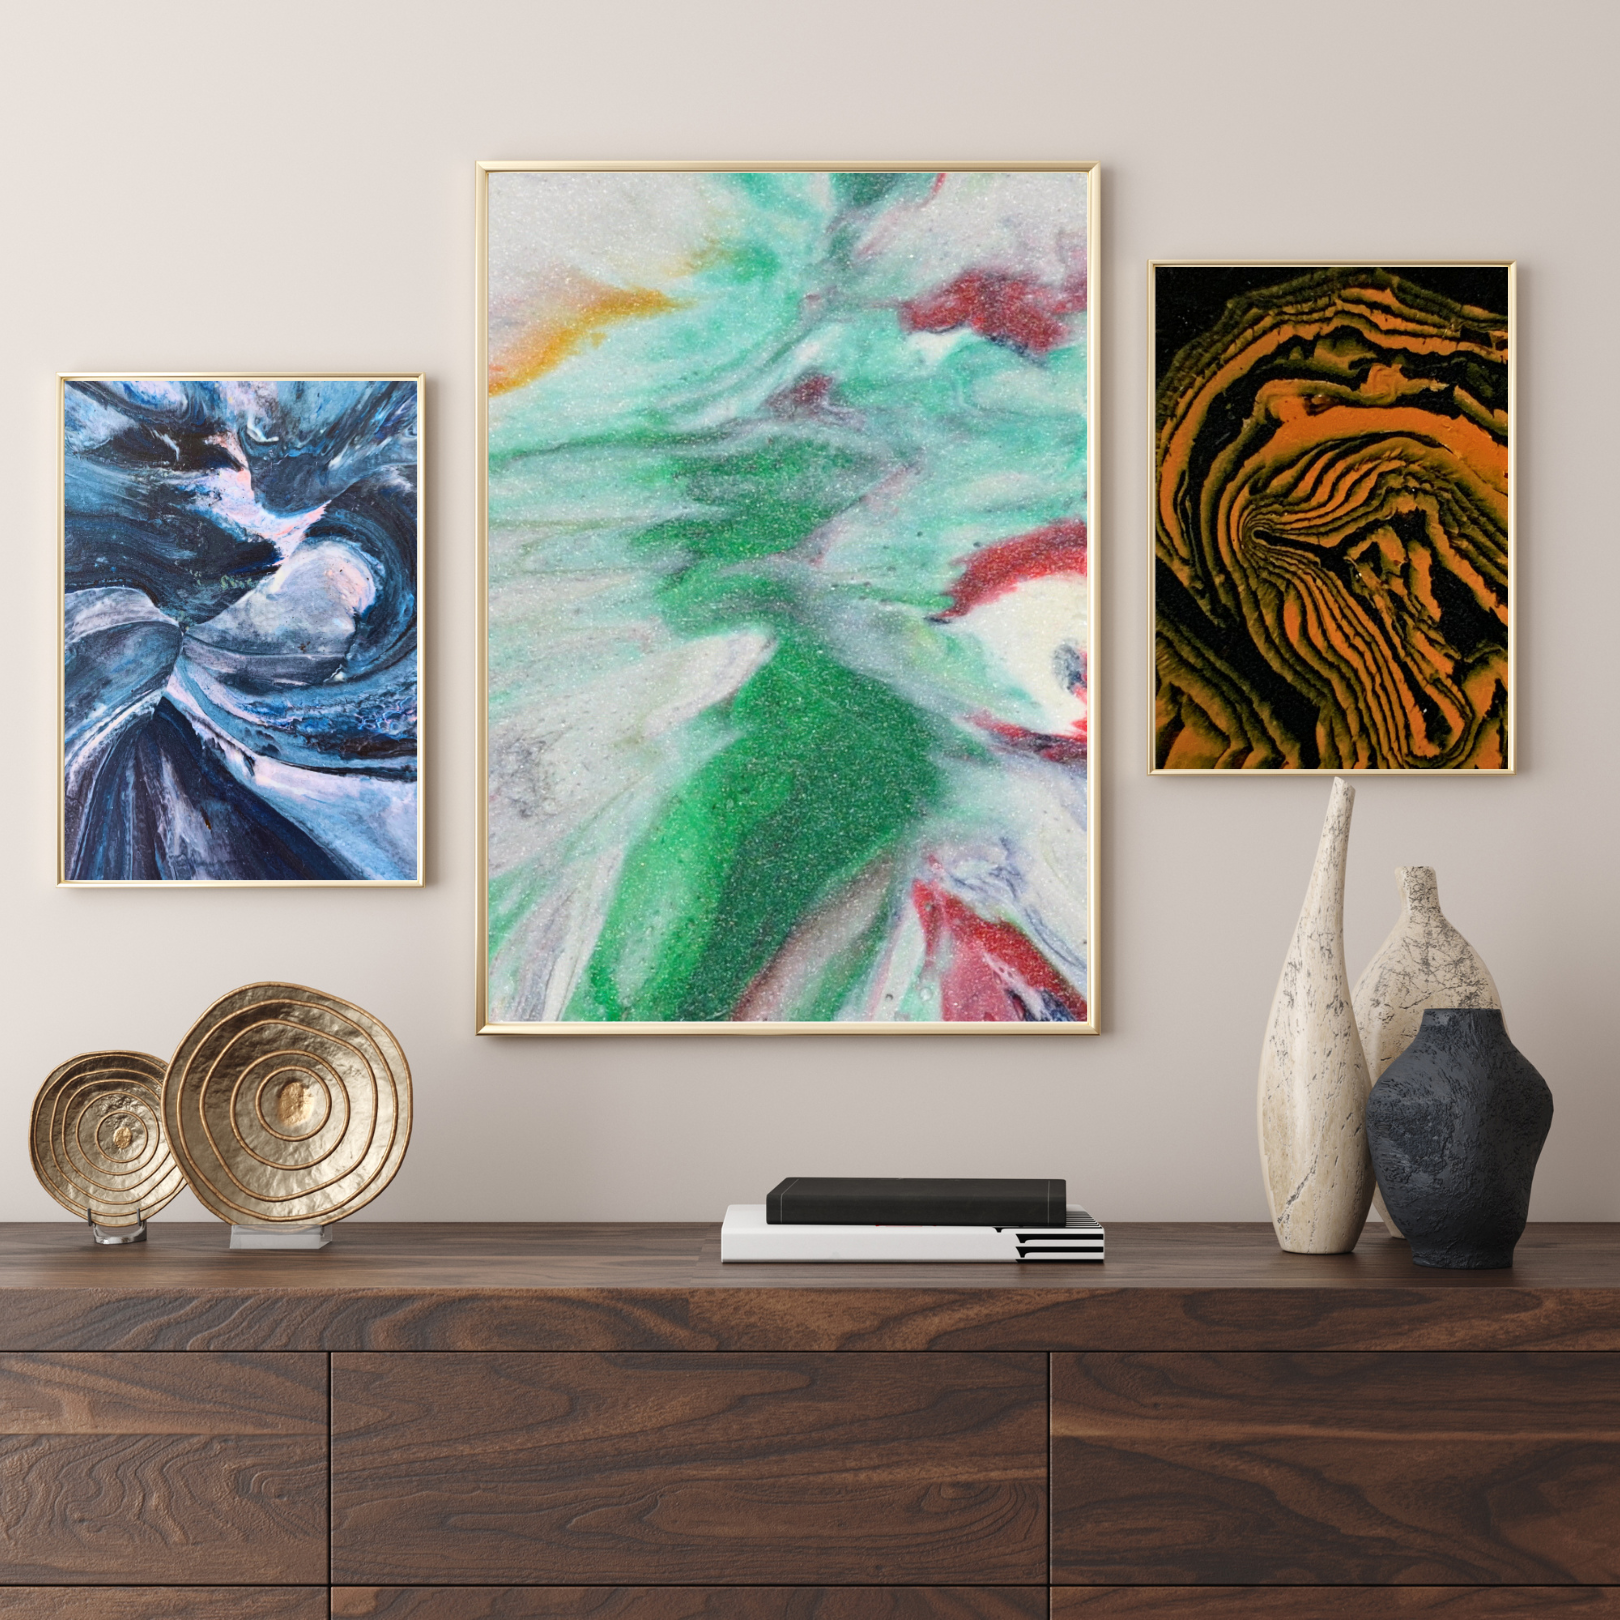 Green River Digital Wall Art by Jagoda Jay Sudak Keshani August 2019 abstract red green recycled plastic nft pdf wall decor printable instant download melted plastic 